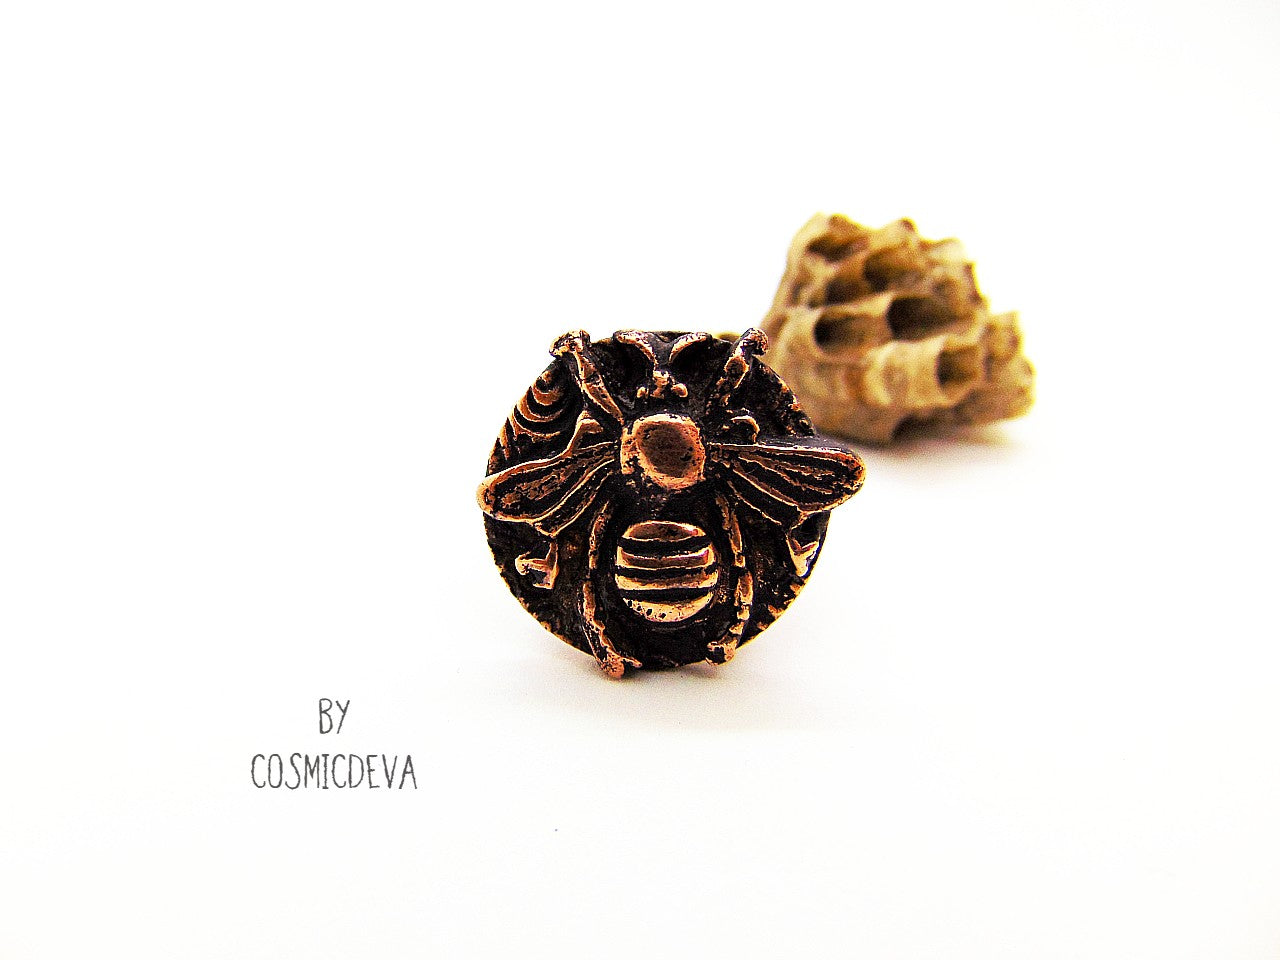 Handmade queen bee goddess, honey bee ring made of solid copper. The ring shank has a beautiful texture and has the cosmicdeva logo inside.Handmade queen bee goddess, honey bee ring made of solid copper. The ring shank has a beautiful texture and has the cosmicdeva logo inside.